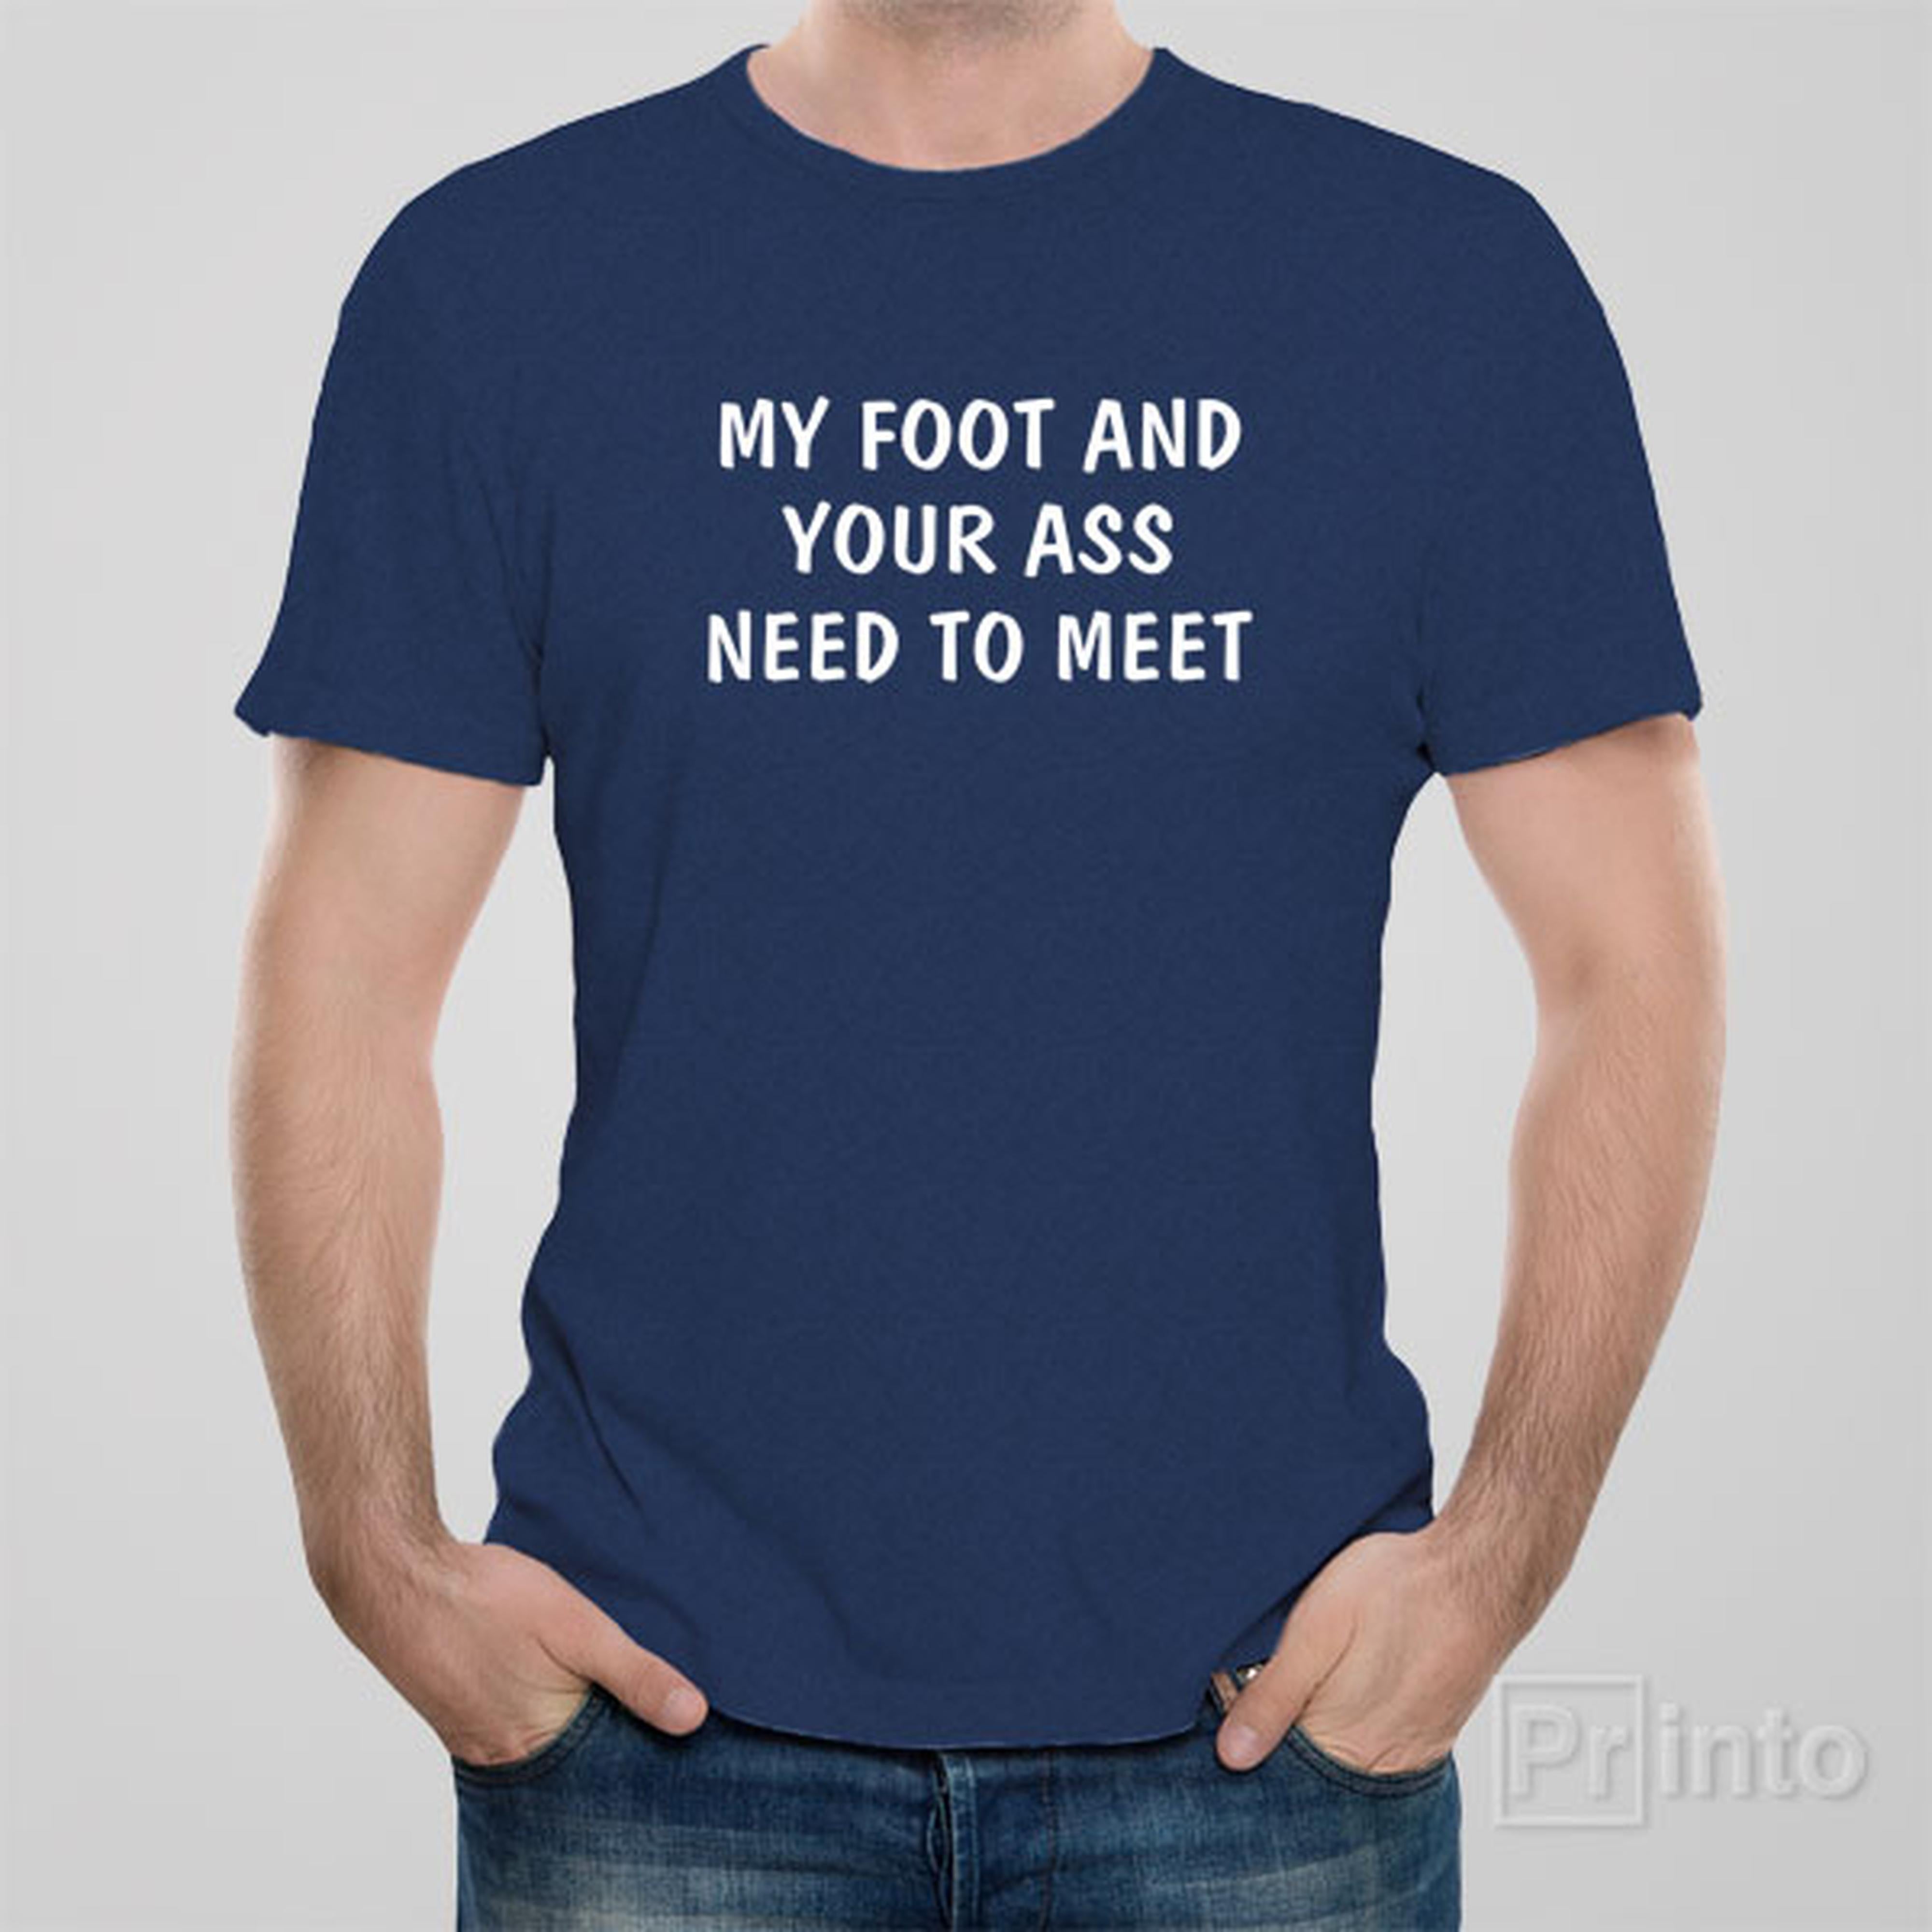 my-foot-and-your-ass-need-to-meet-t-shirt